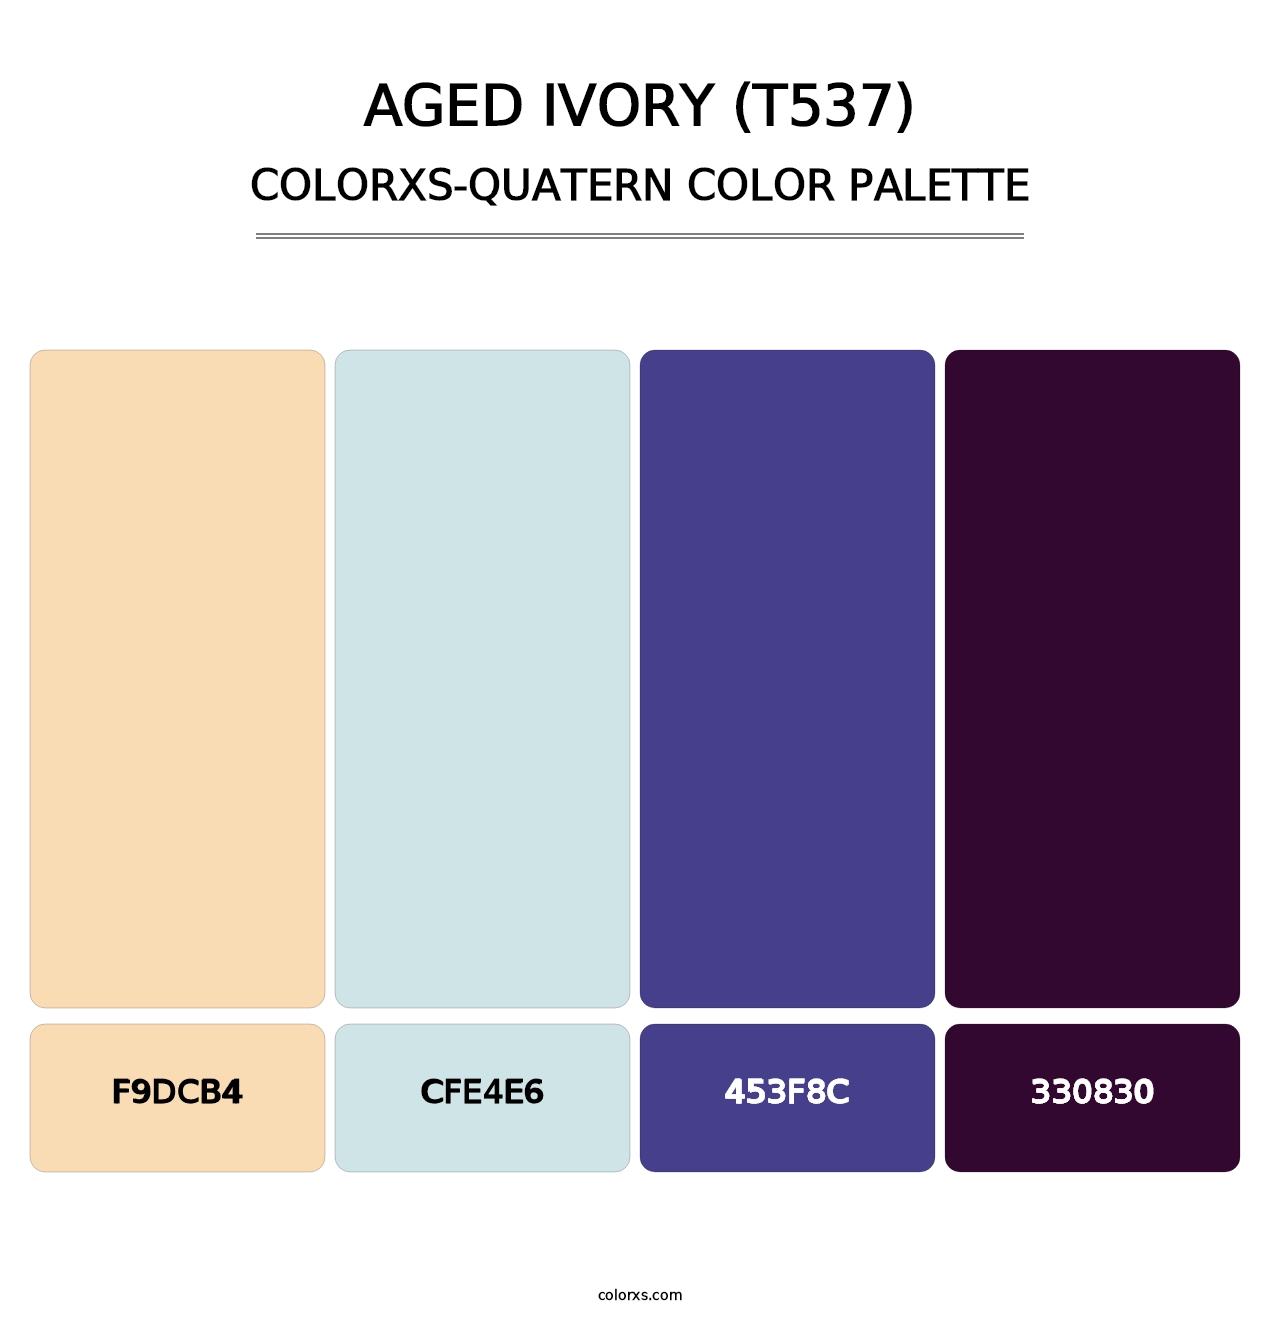 Aged Ivory (T537) - Colorxs Quatern Palette